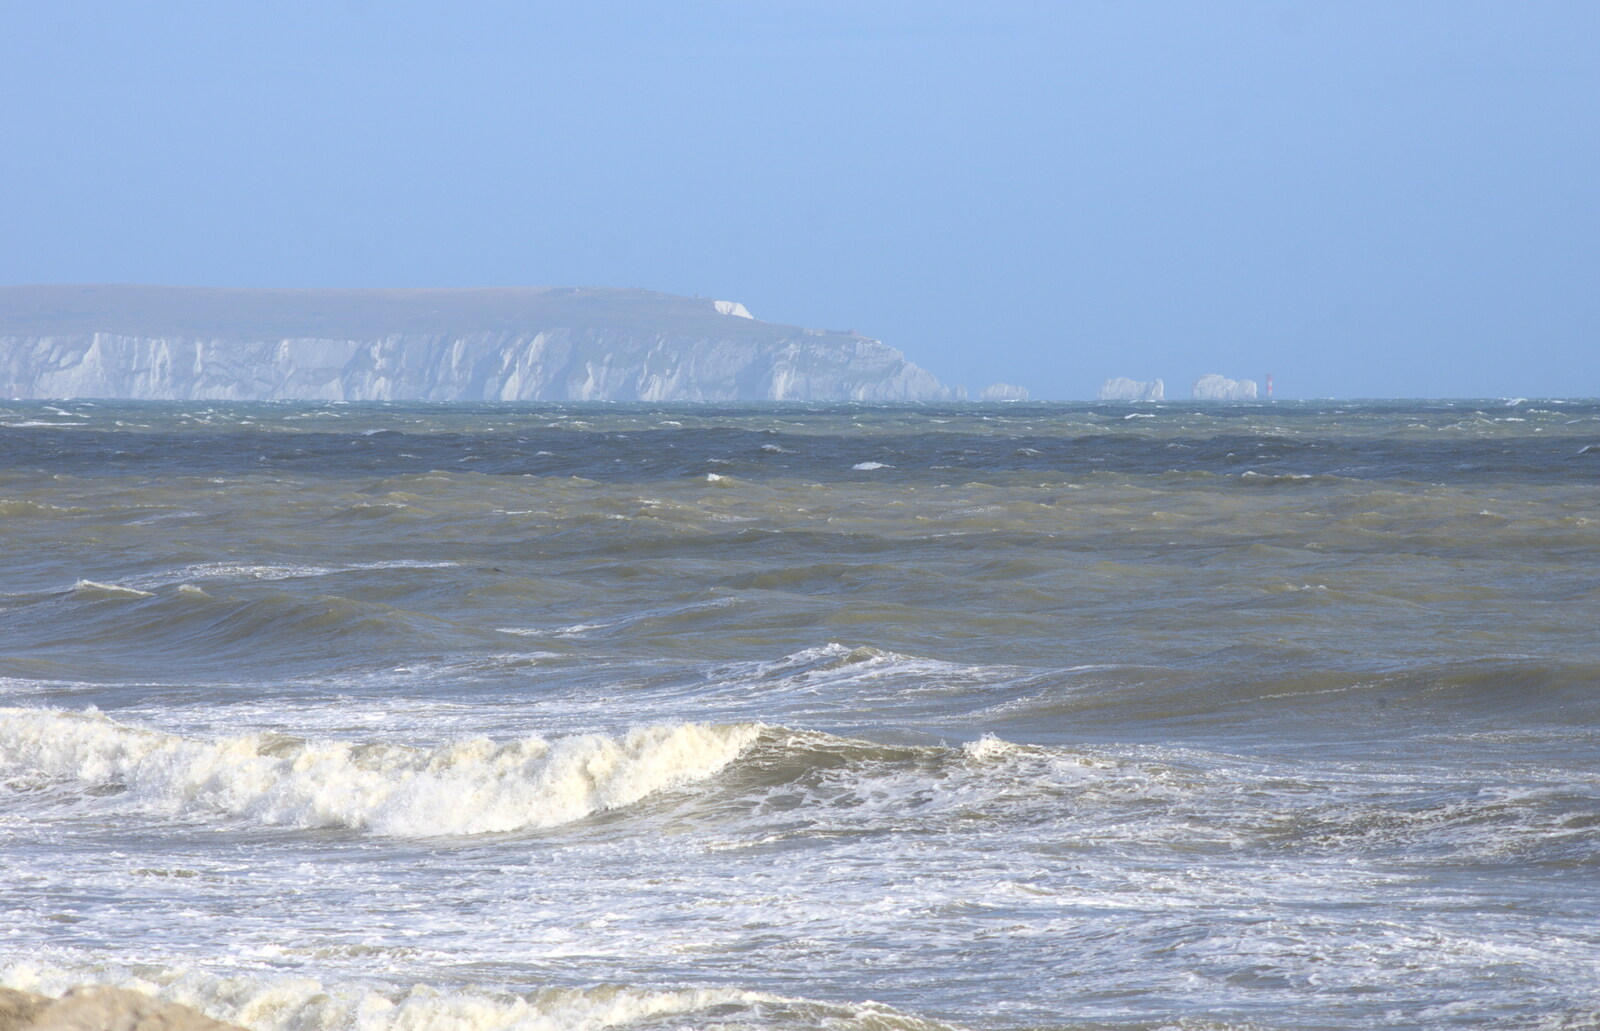 The Isle of Wight and the Needles from Blustery Beach Trips, Walkford and Highcliffe, Dorset - 29th July 2018